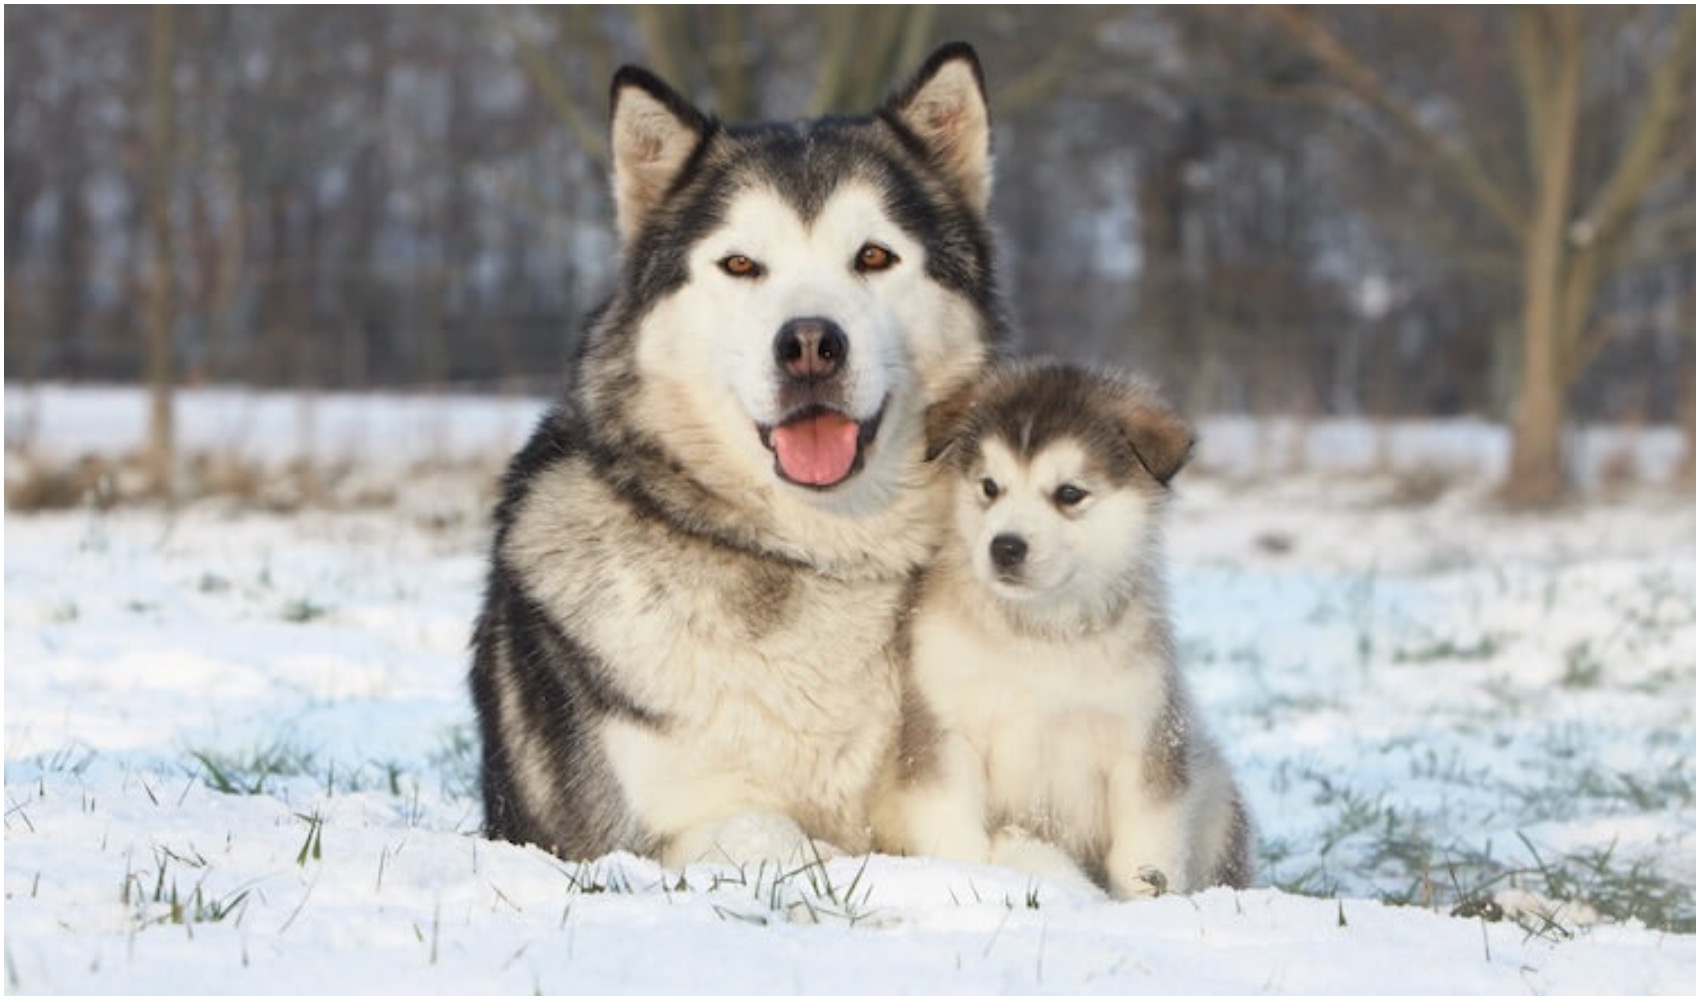 Giant Alaskan Malamute: What To Know